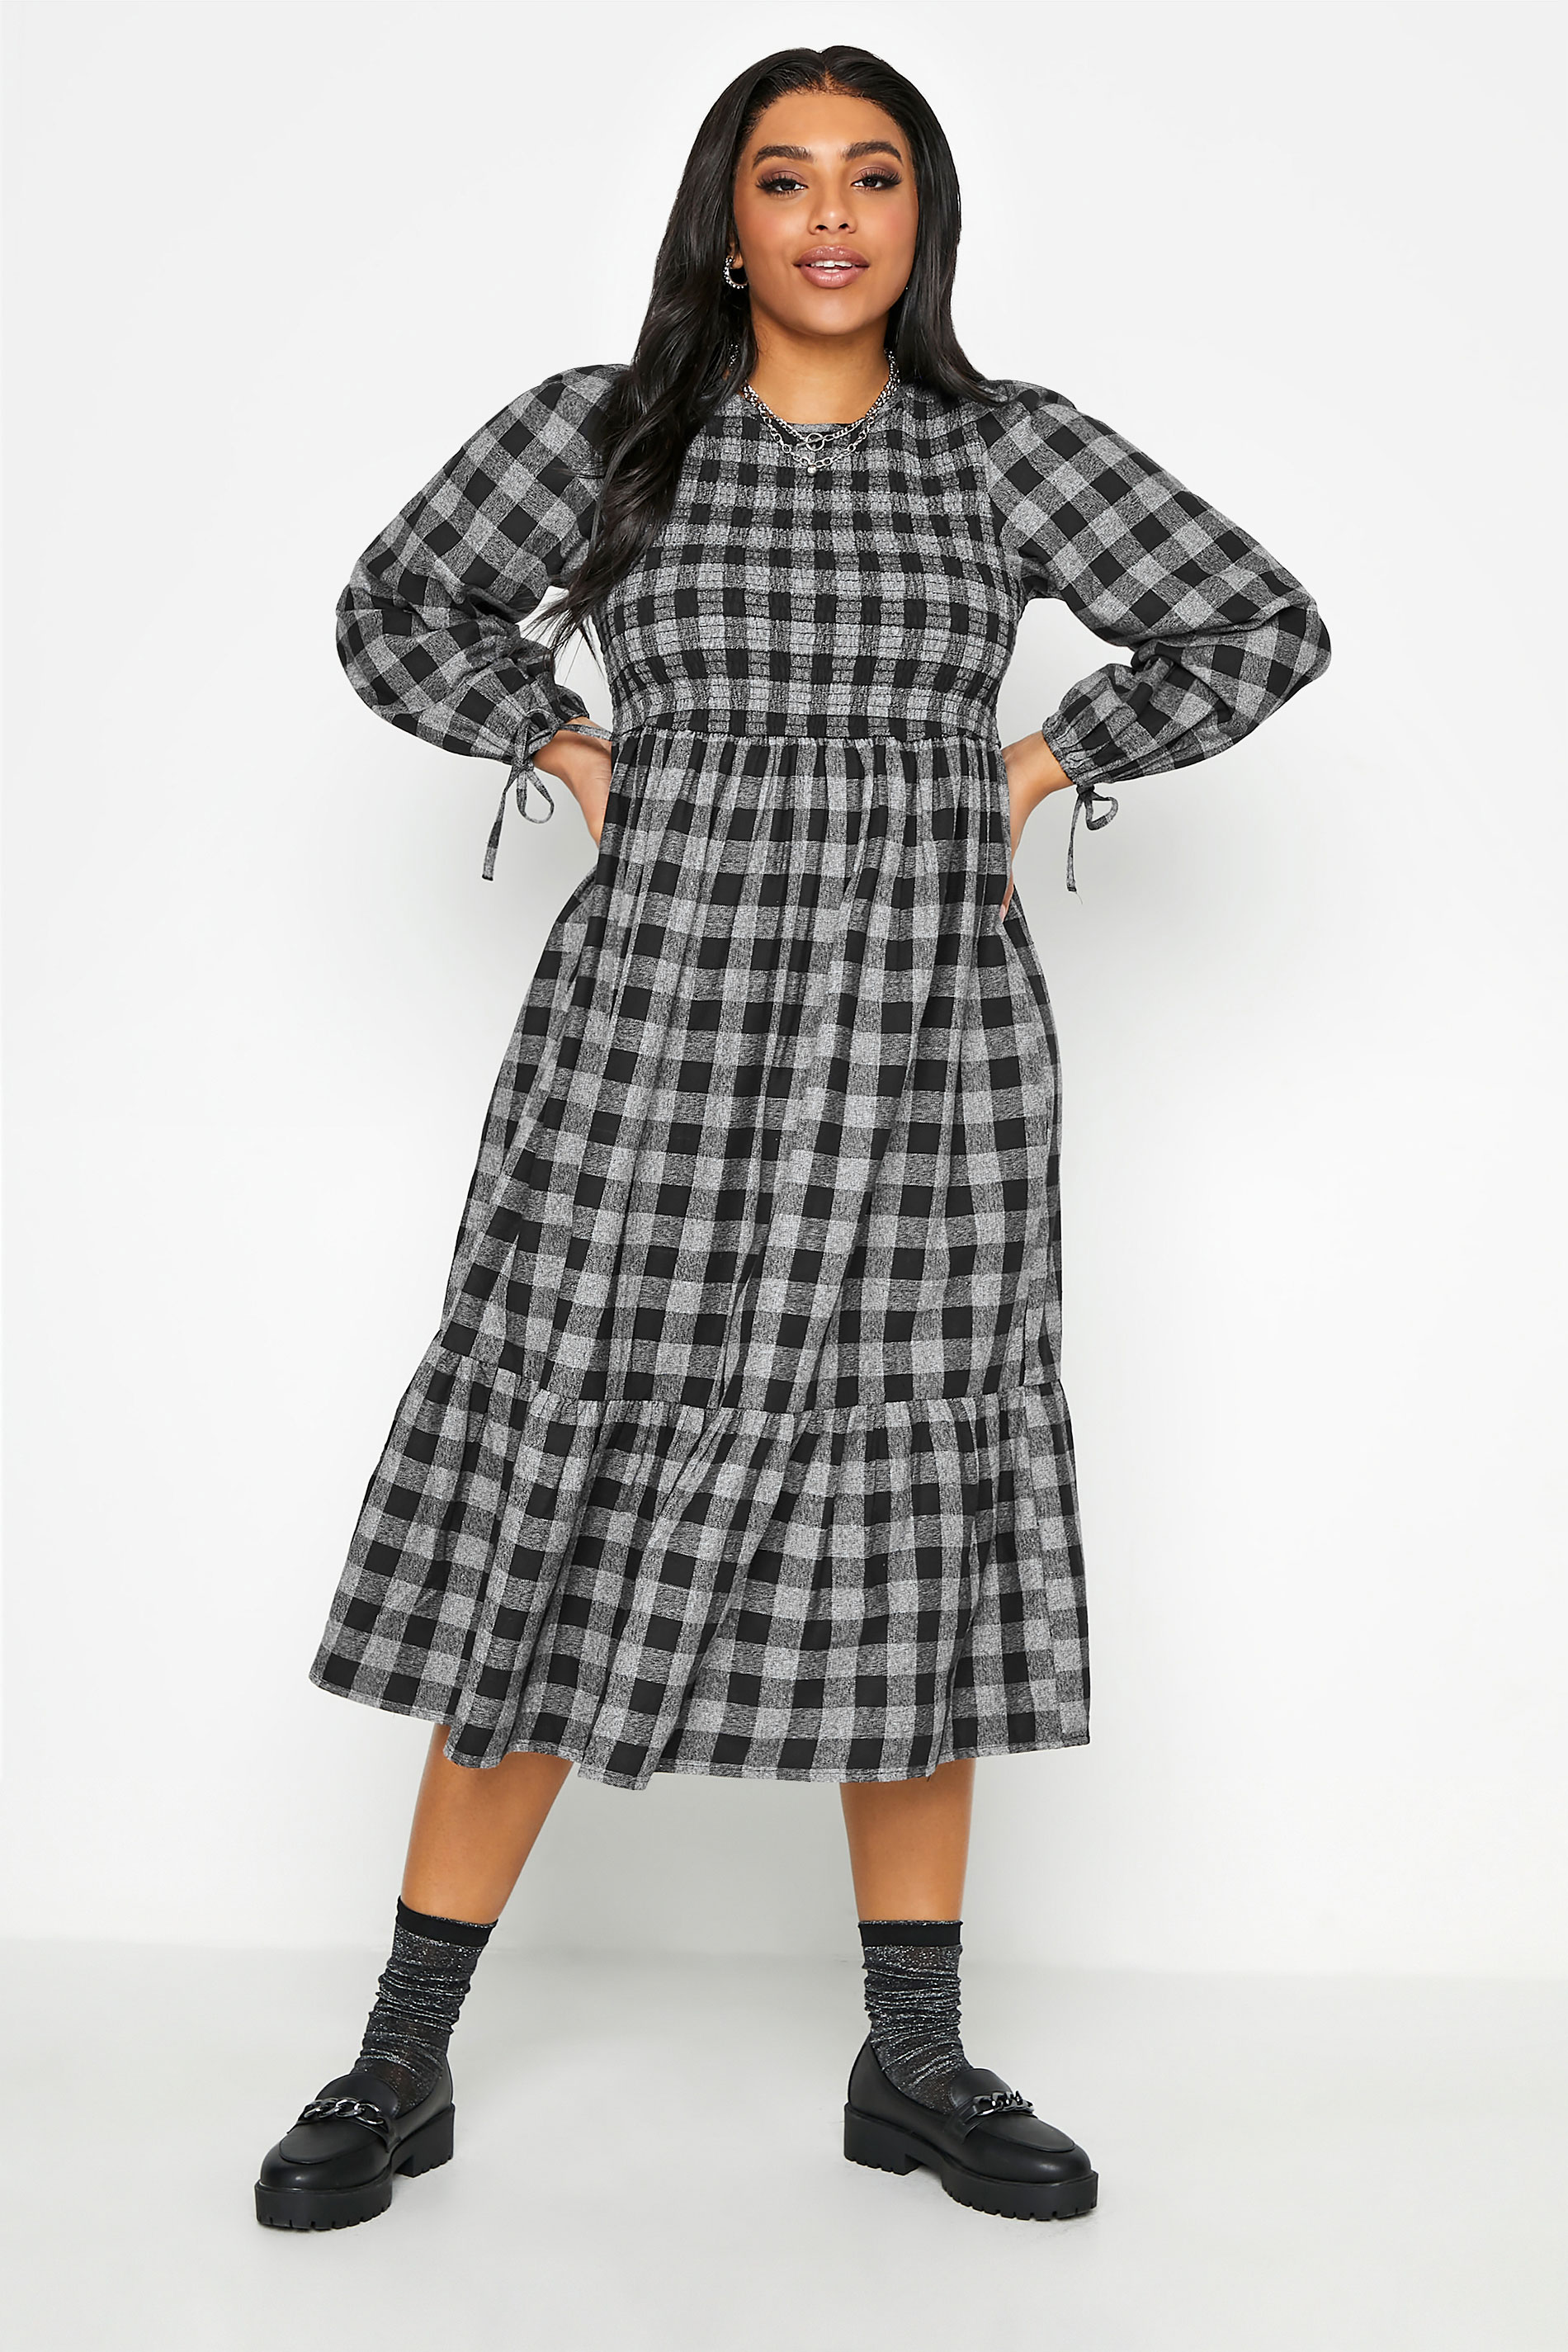 LIMITED COLLECTION Black & Grey Check Shirred Dress_A.jpg